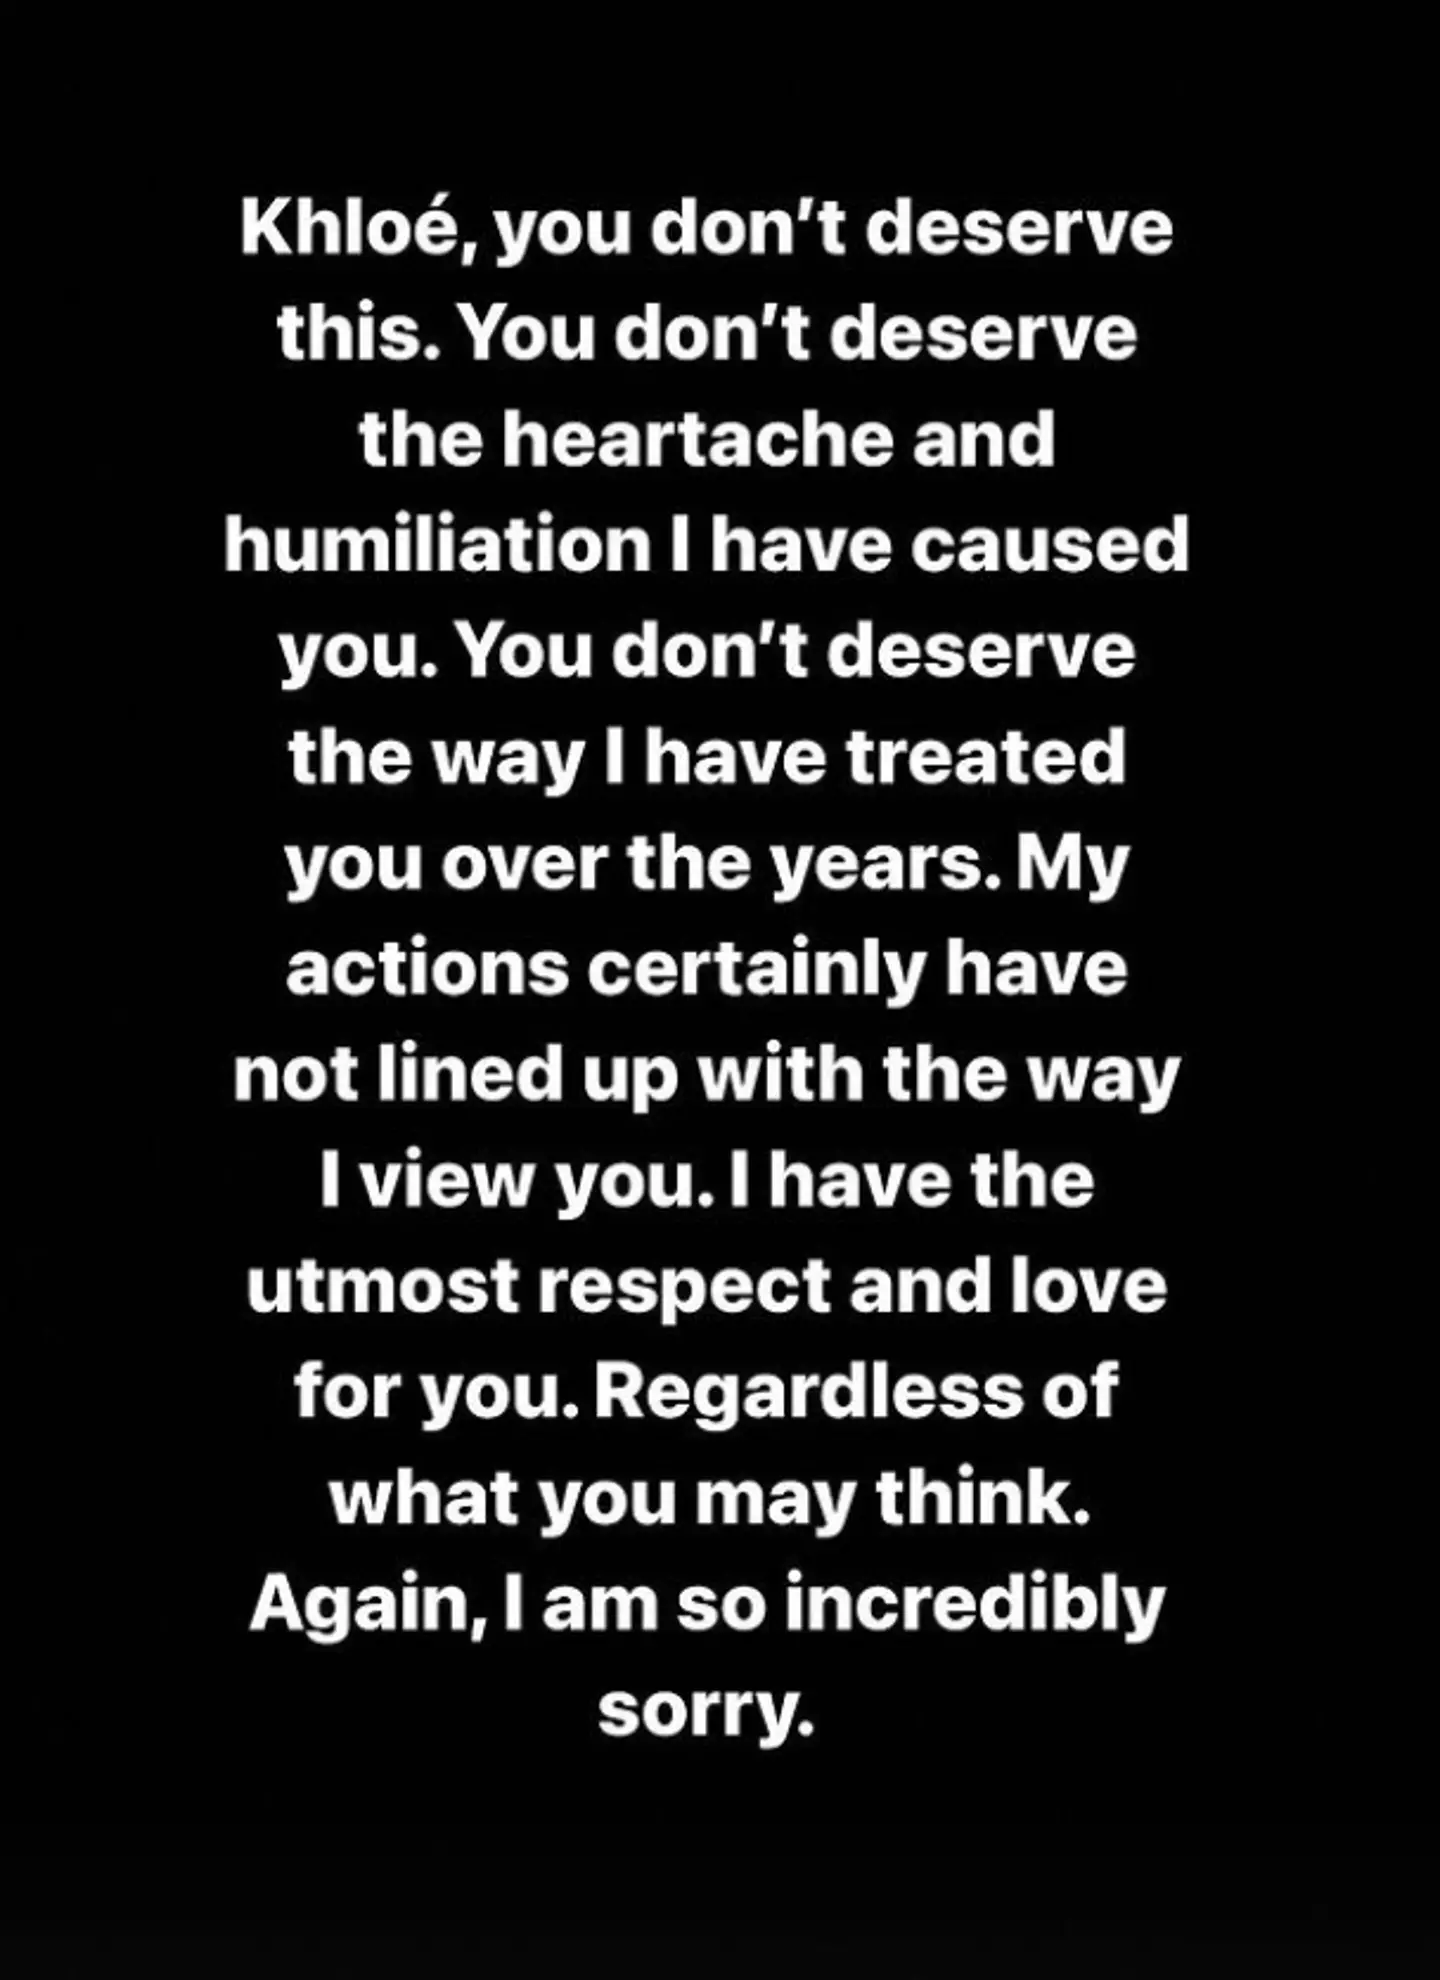 Tristan has apologised to Khloe (